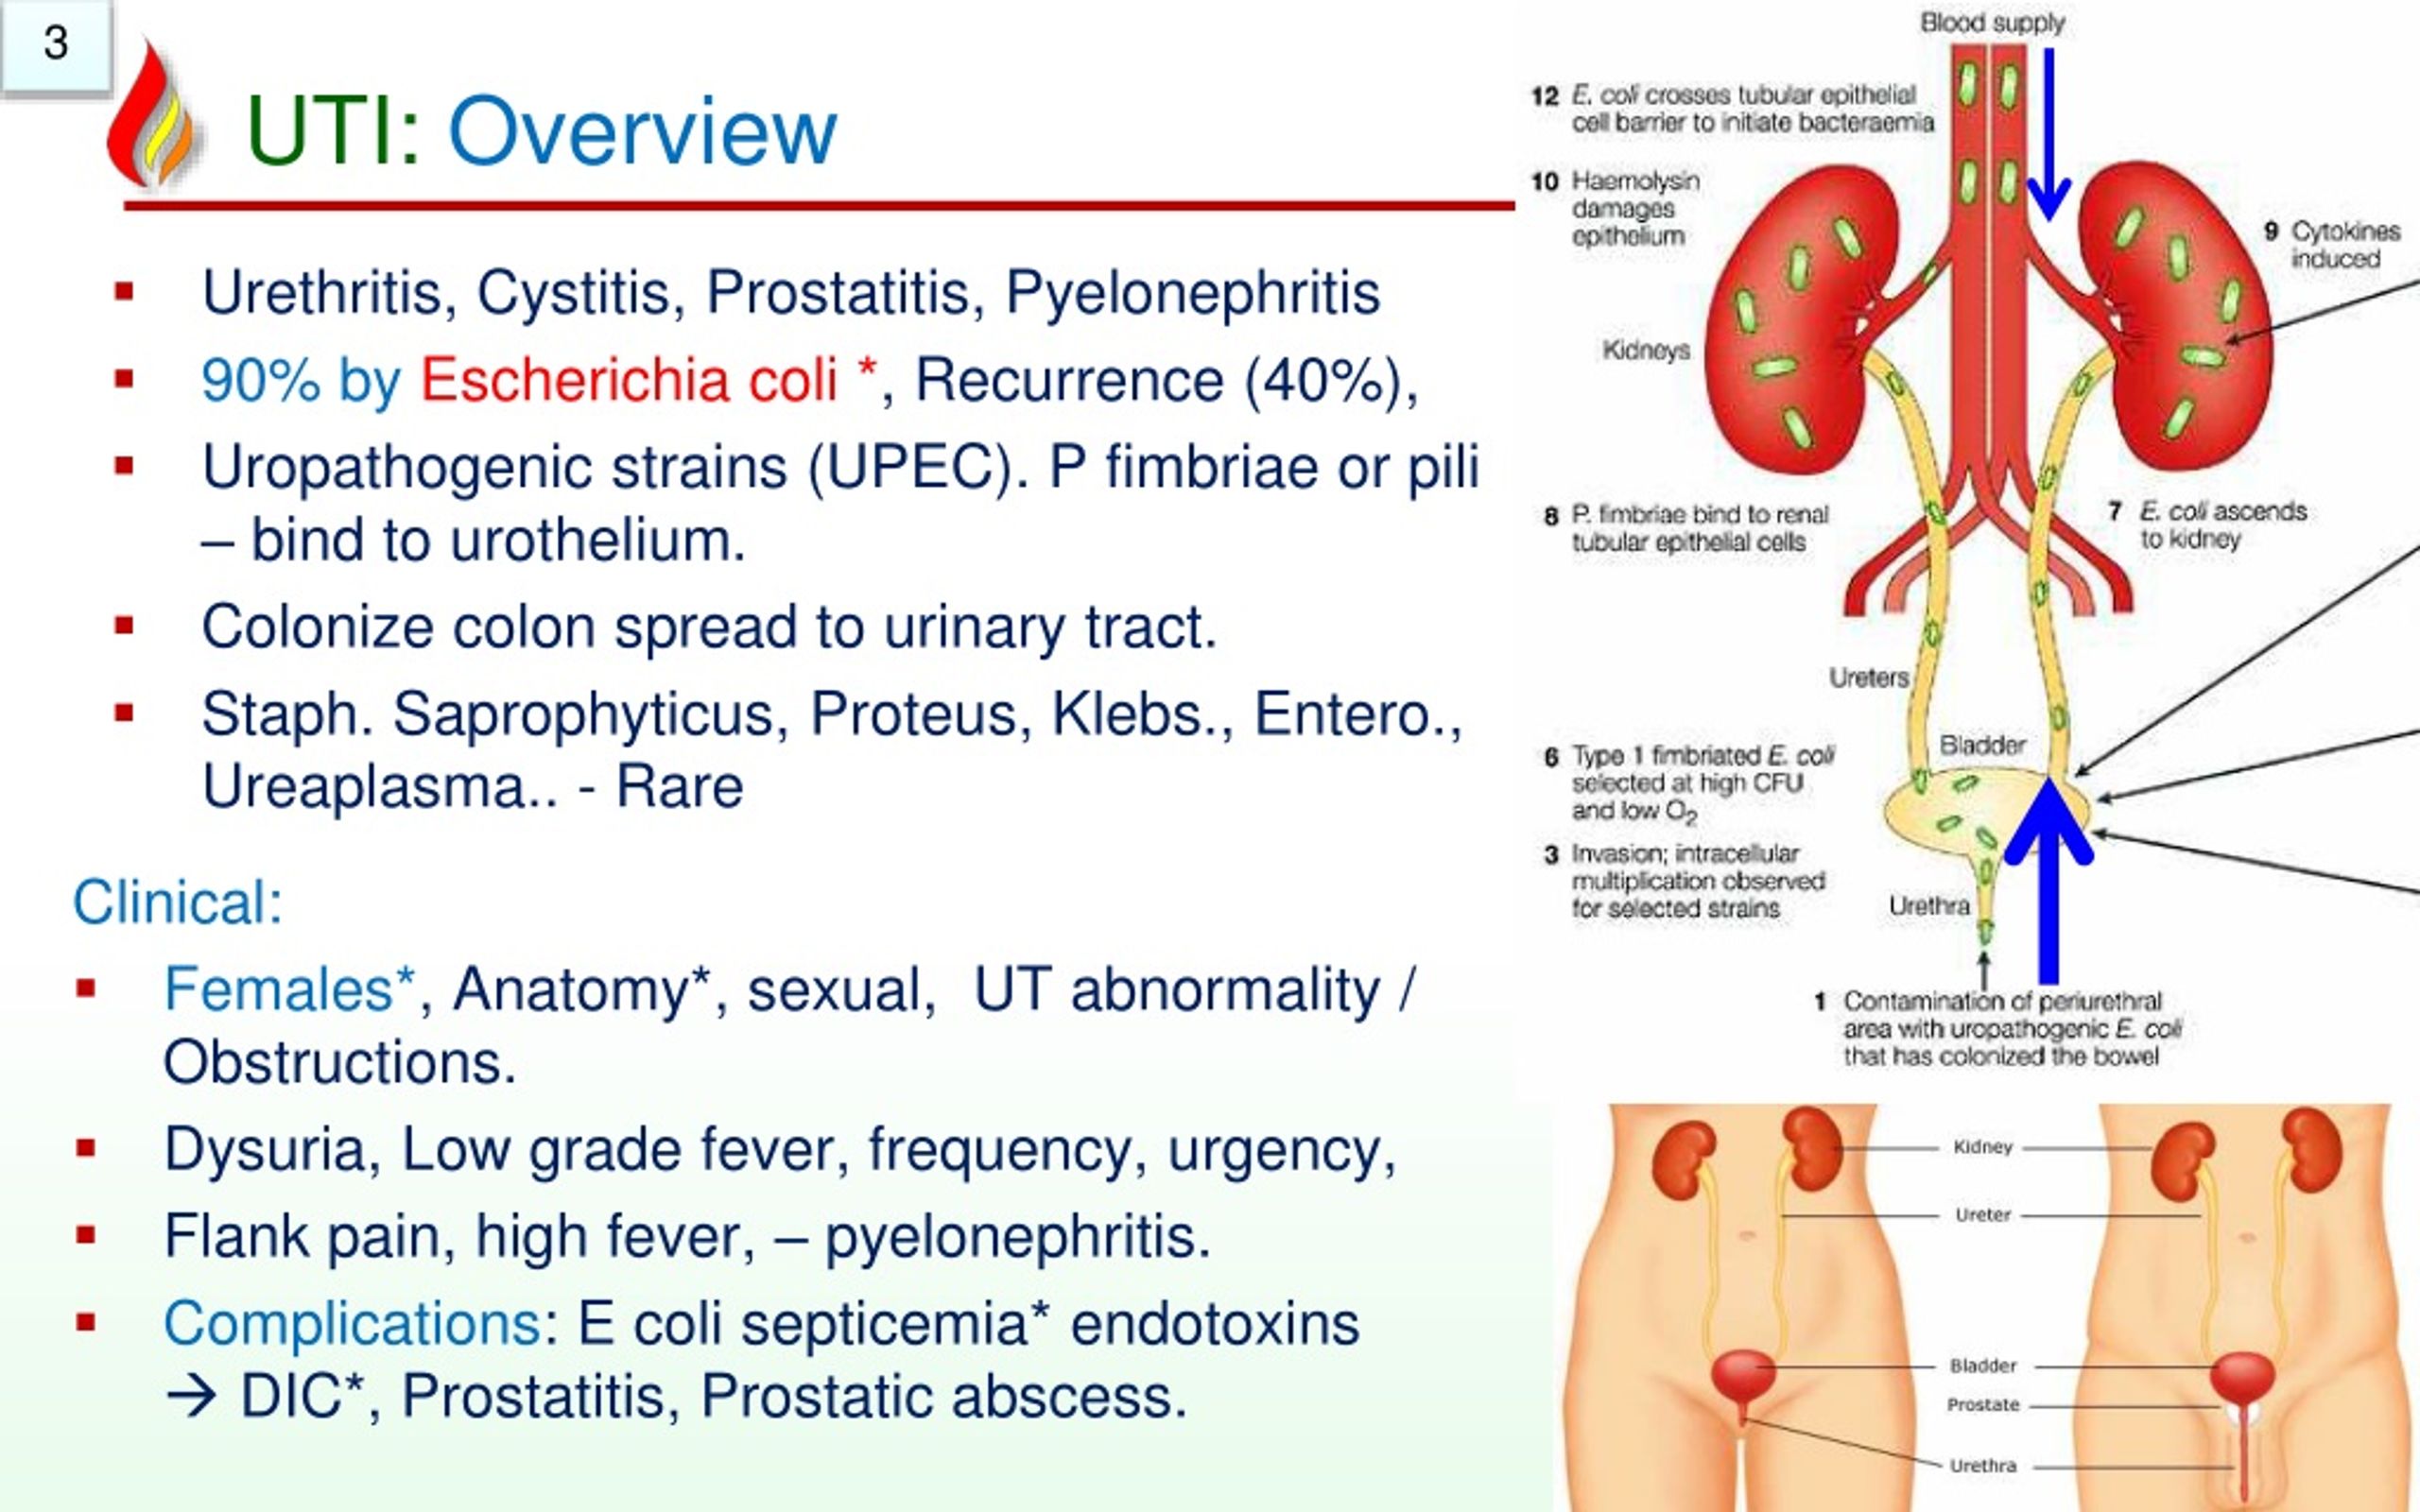 Ppt Pathology Of Urinary Tract Infectionws Powerpoint Presentation Free Download Id8201956 0555